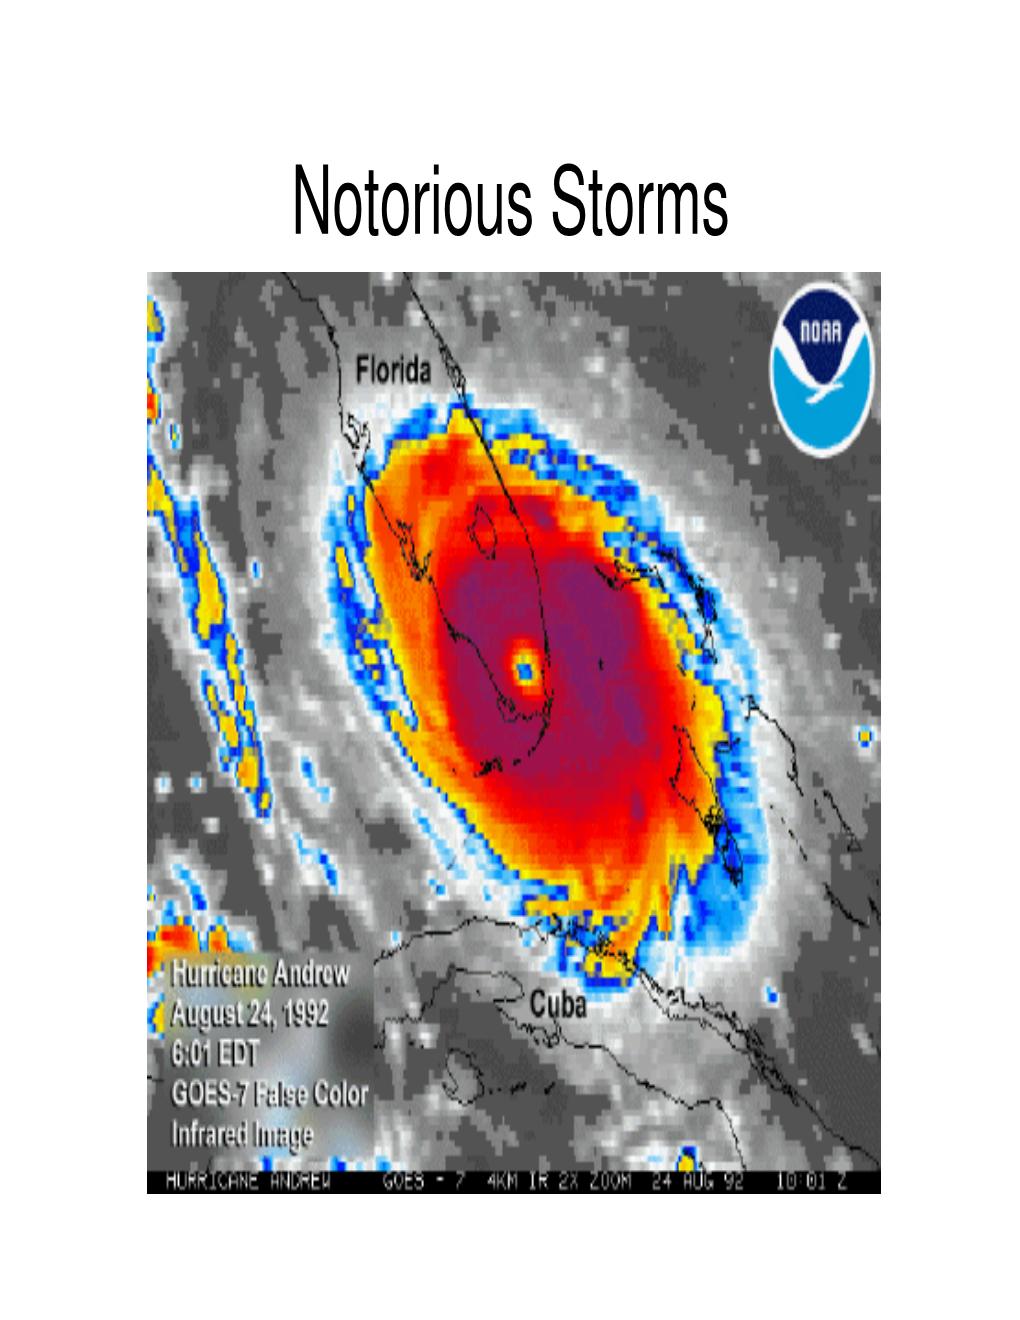 Notorious Storms